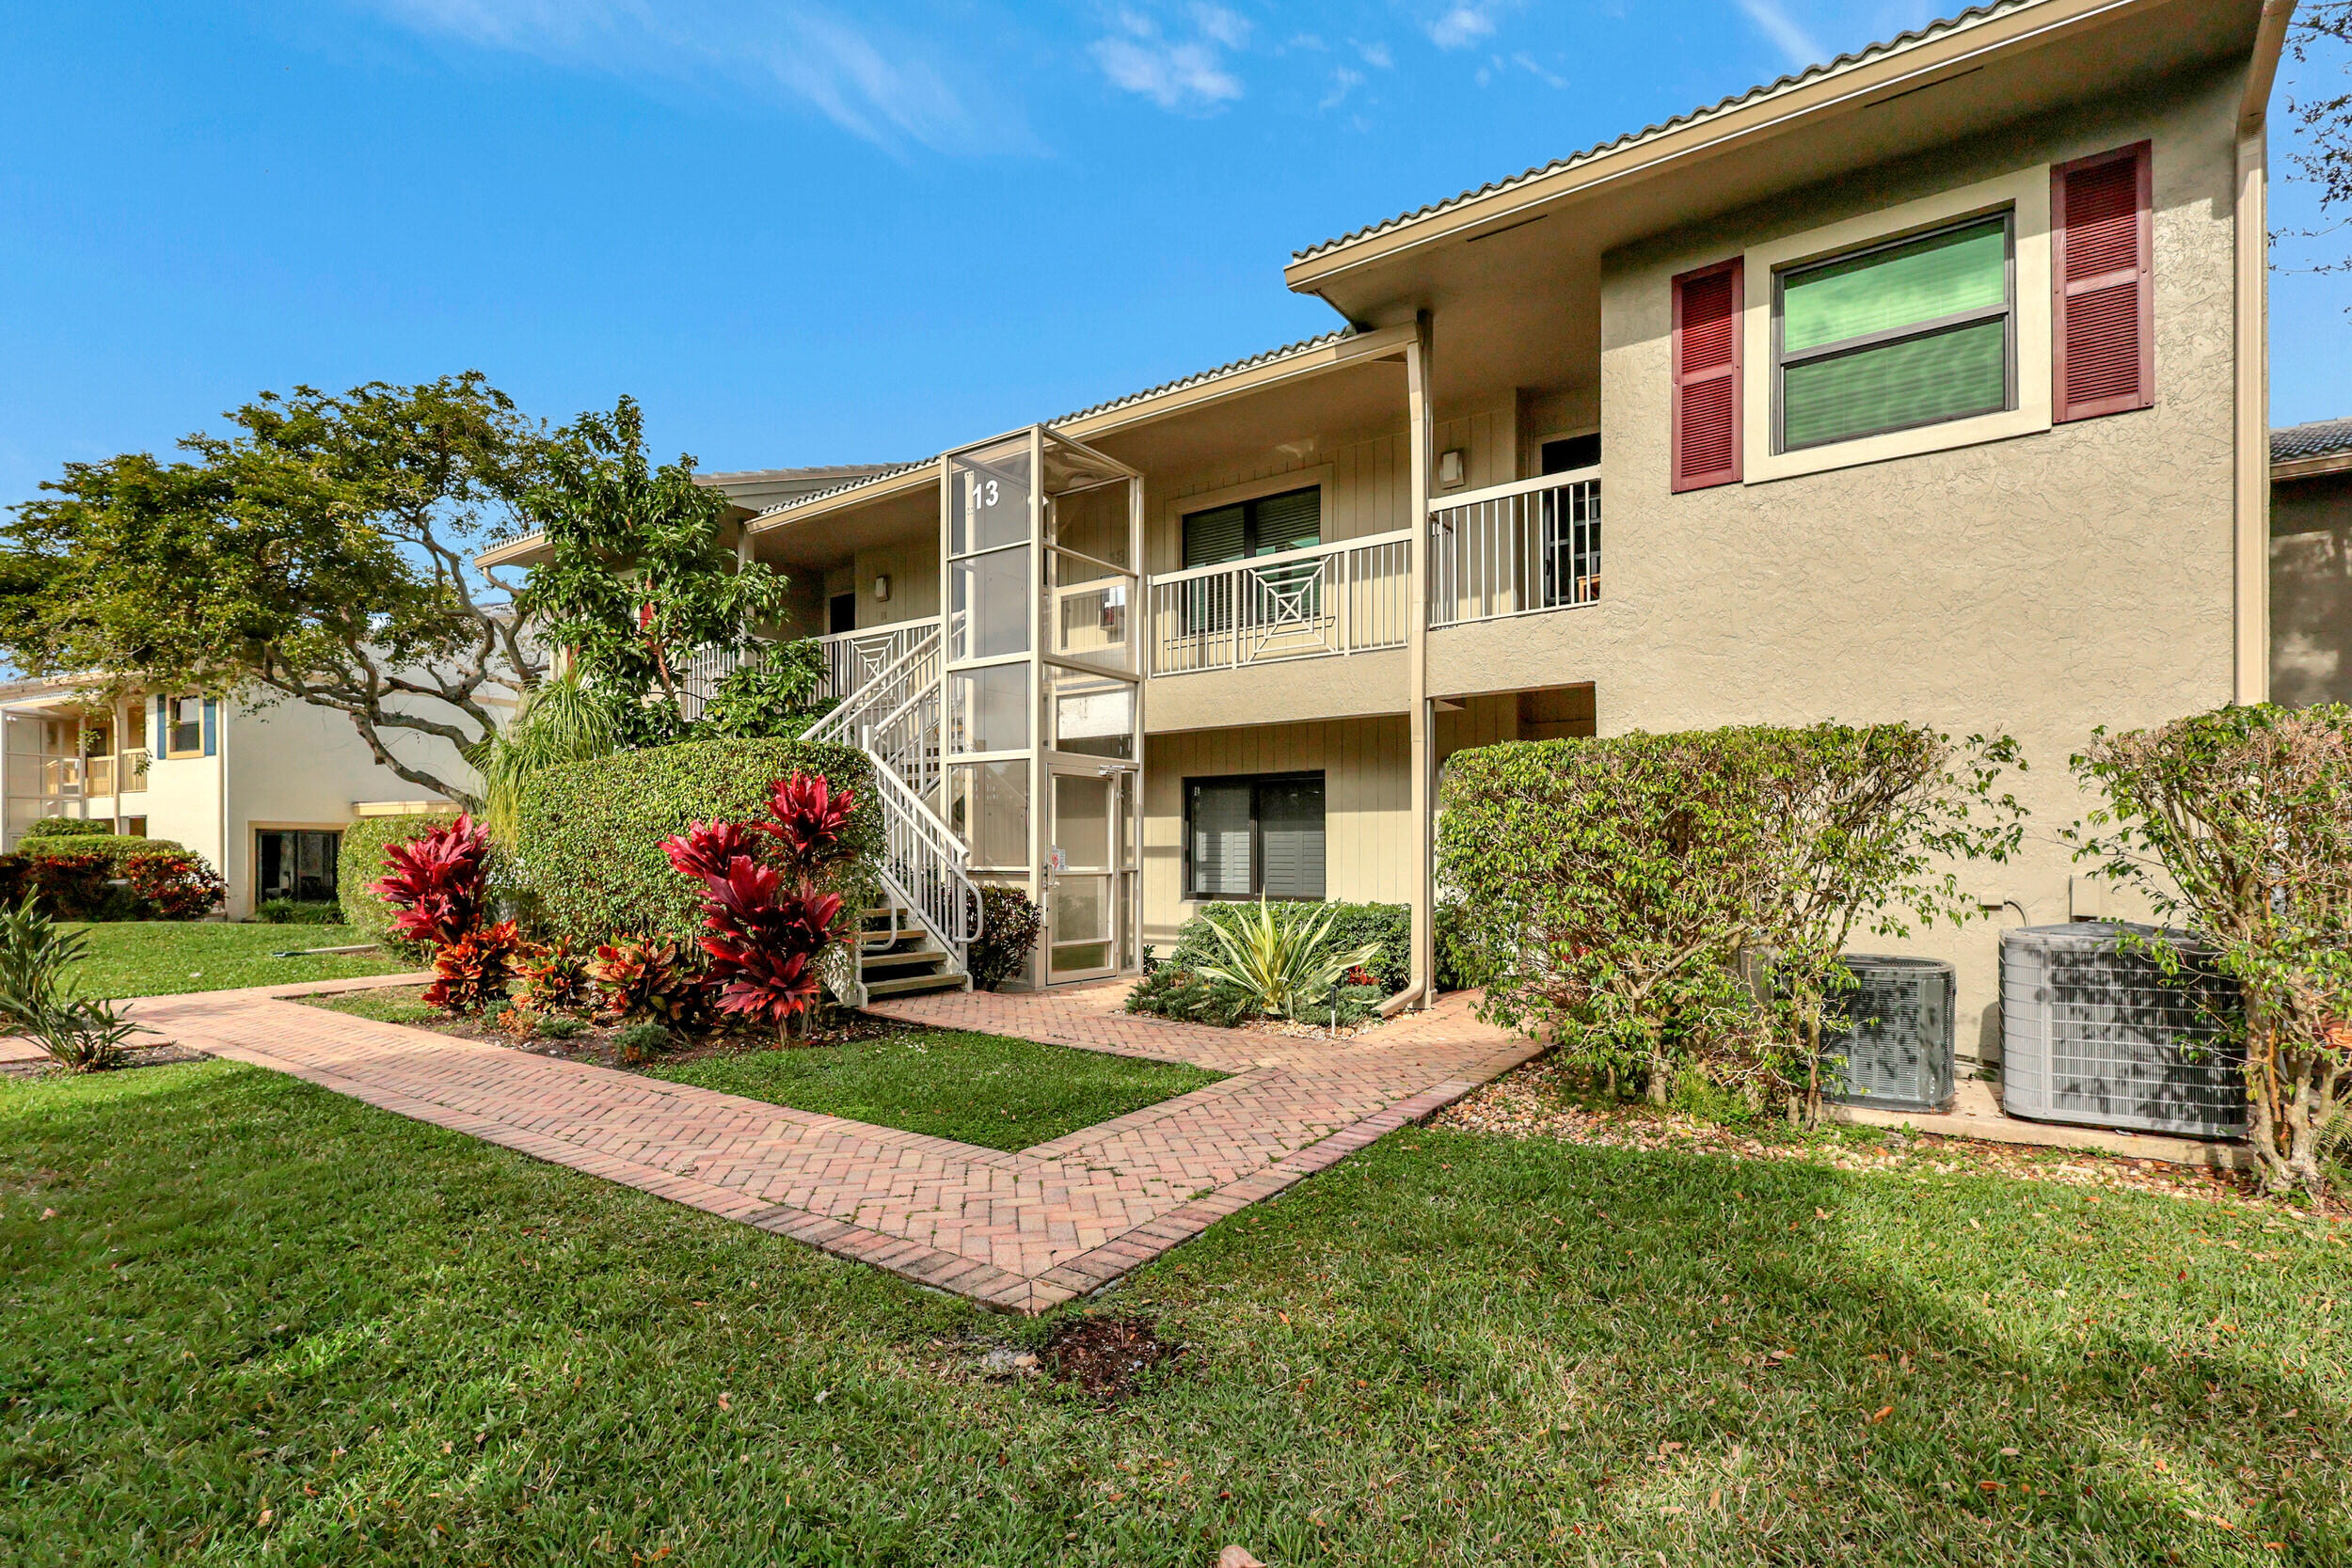 Property for Sale at 13 Eastgate Drive D, Boynton Beach, Palm Beach County, Florida - Bedrooms: 3 
Bathrooms: 2  - $399,000